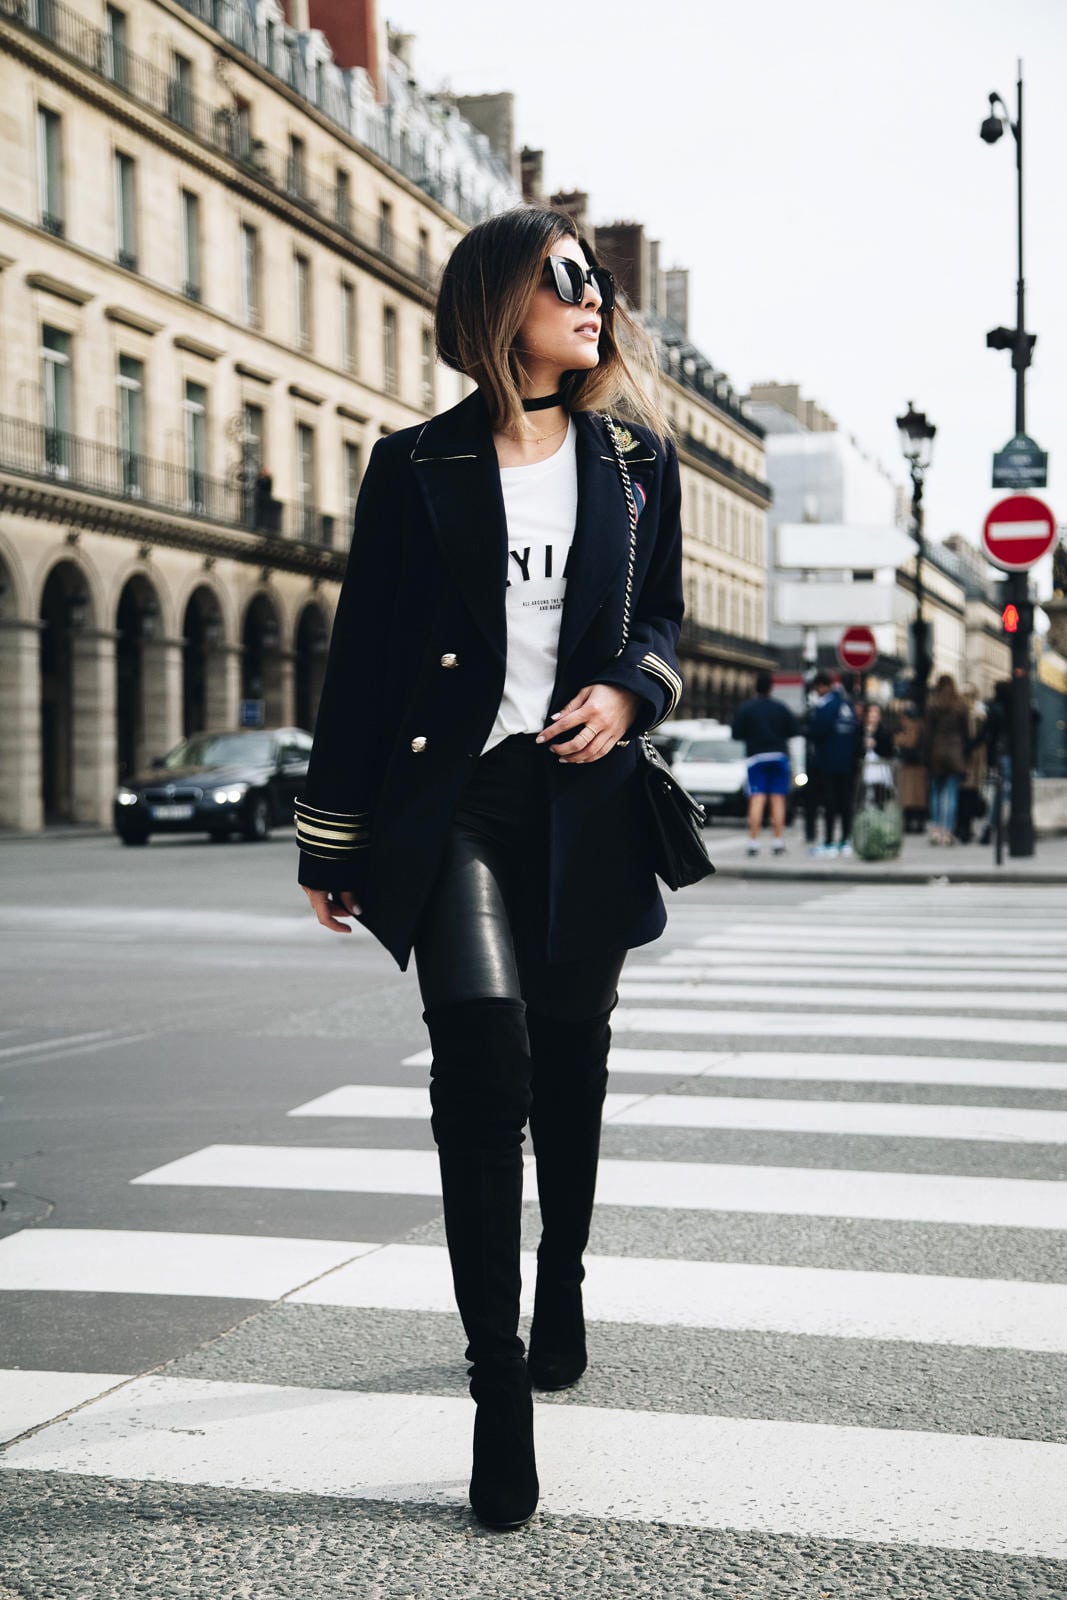 Black Leggings with Military Jacket Outfits (6 ideas & outfits)